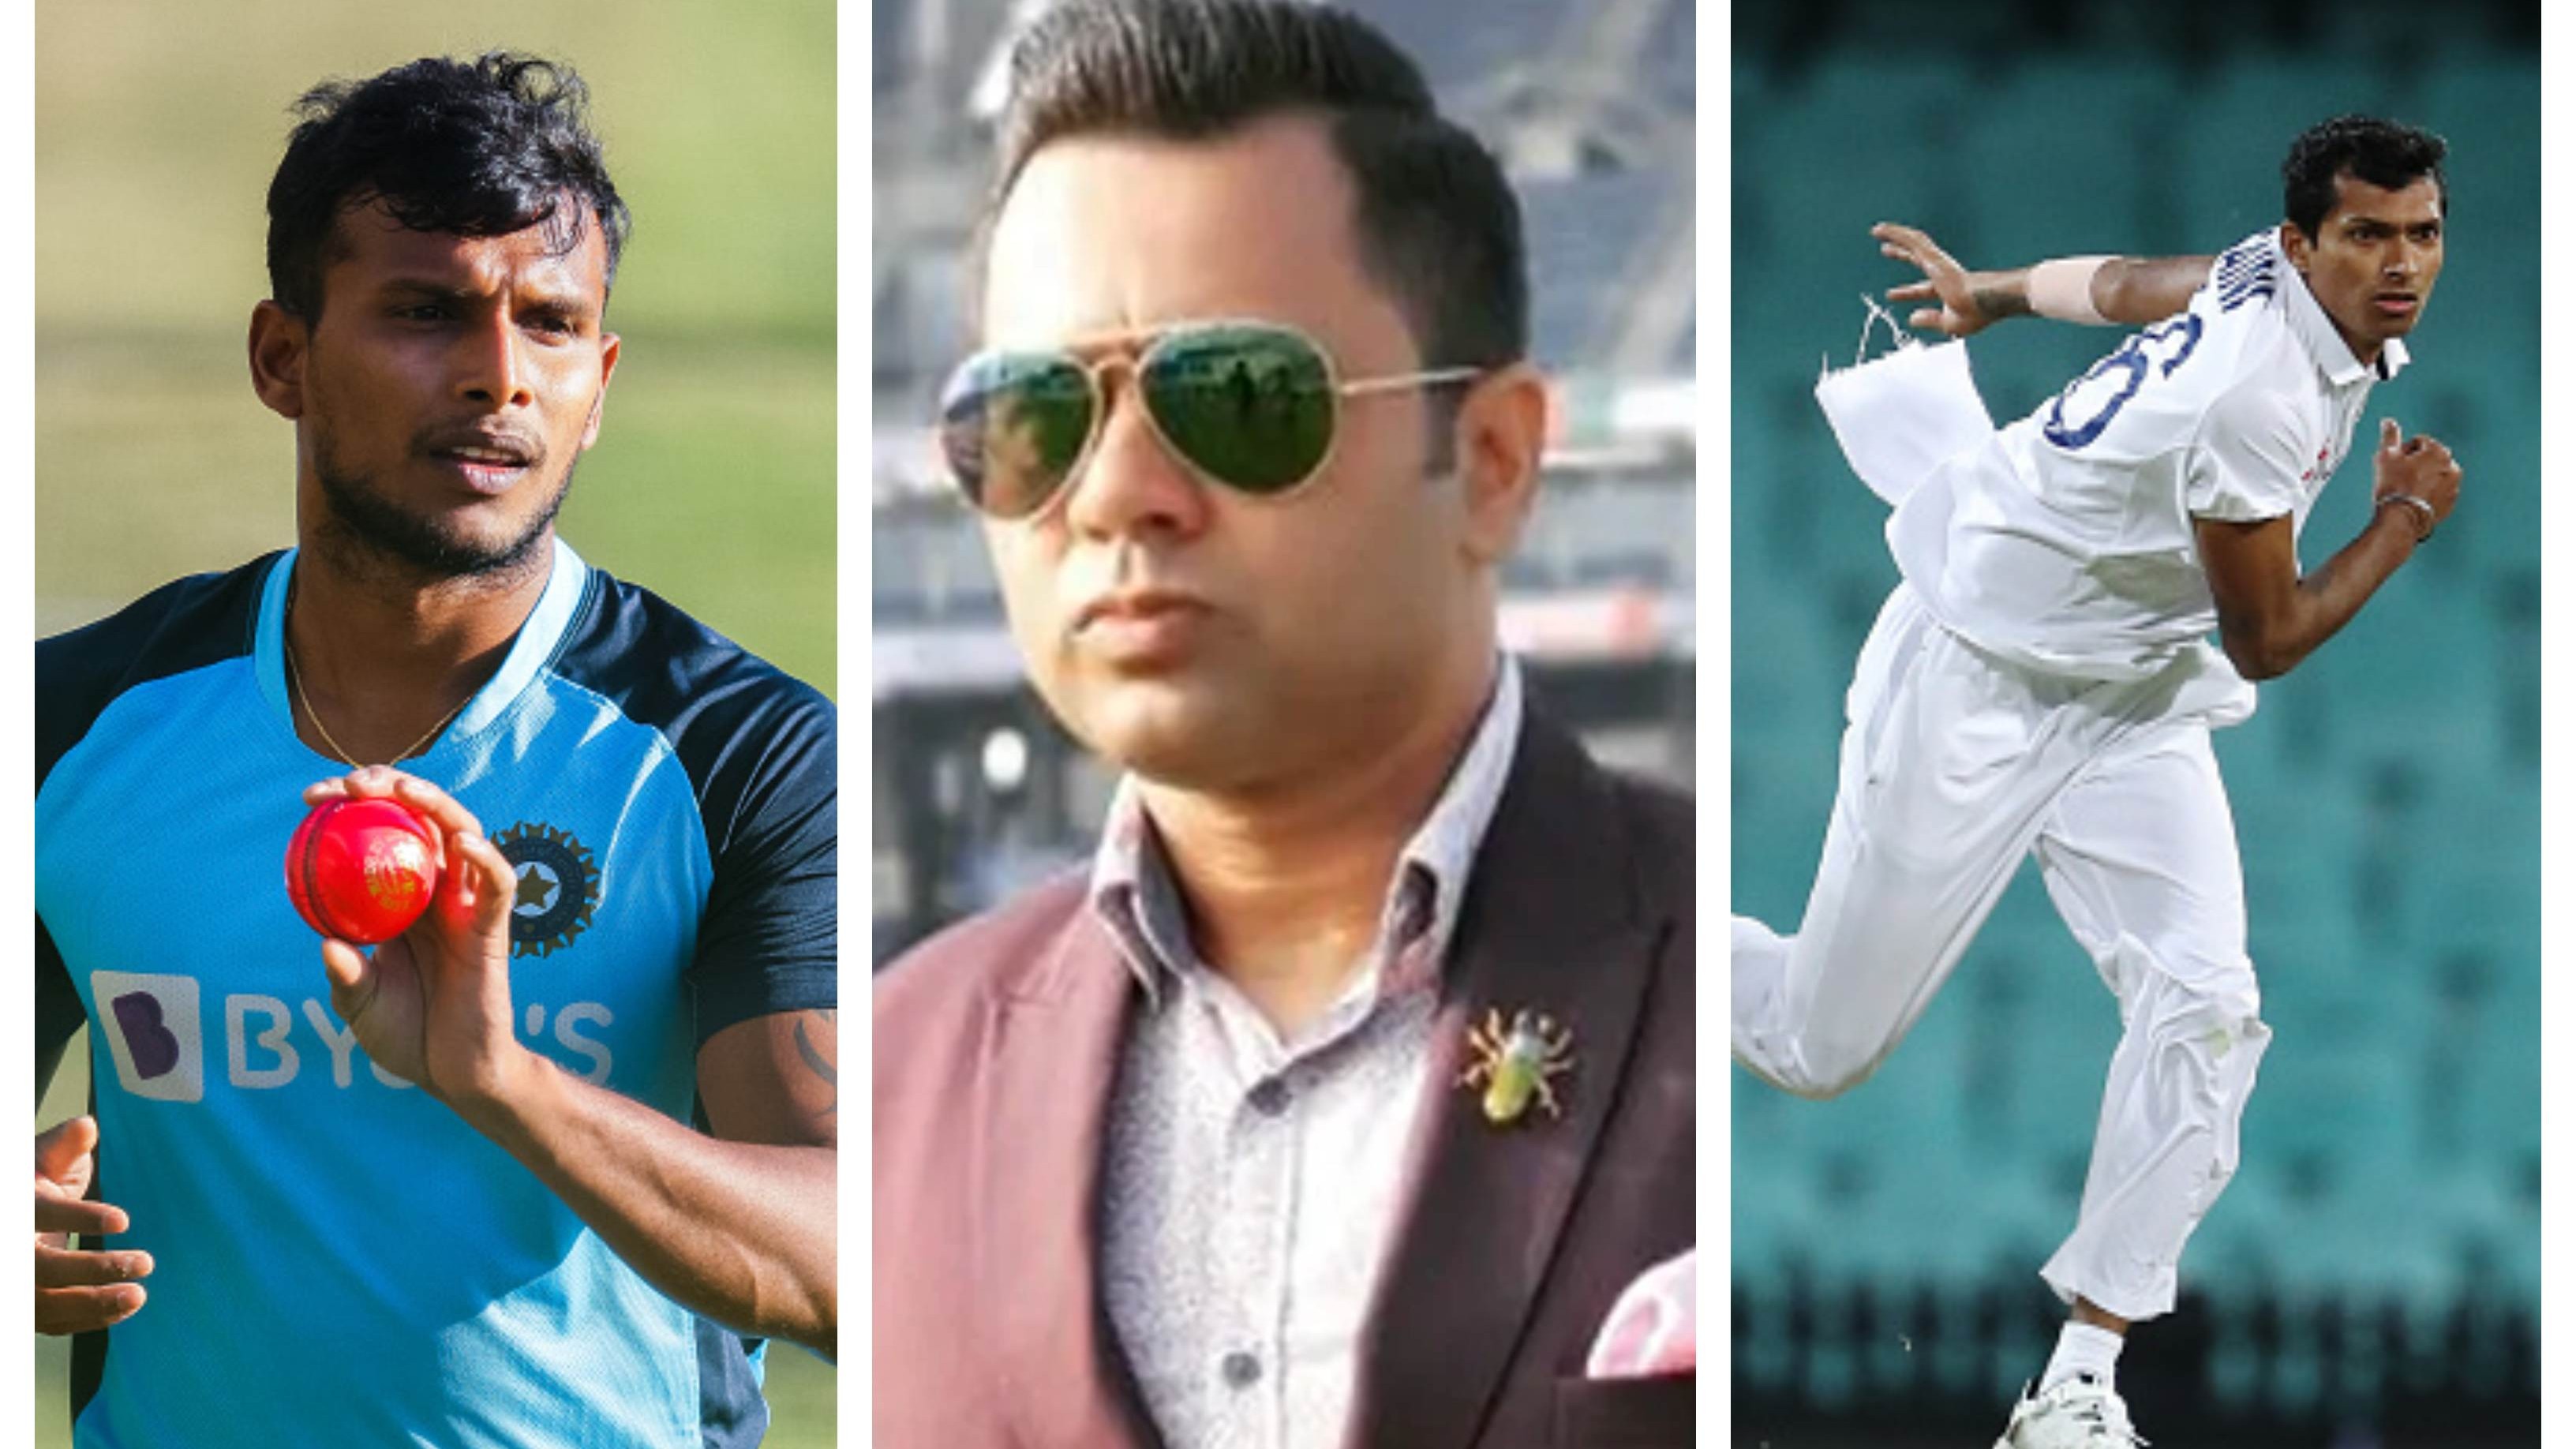 AUS v IND 2020-21: Aakash Chopra picks this pacer to replace Umesh Yadav in Sydney Test